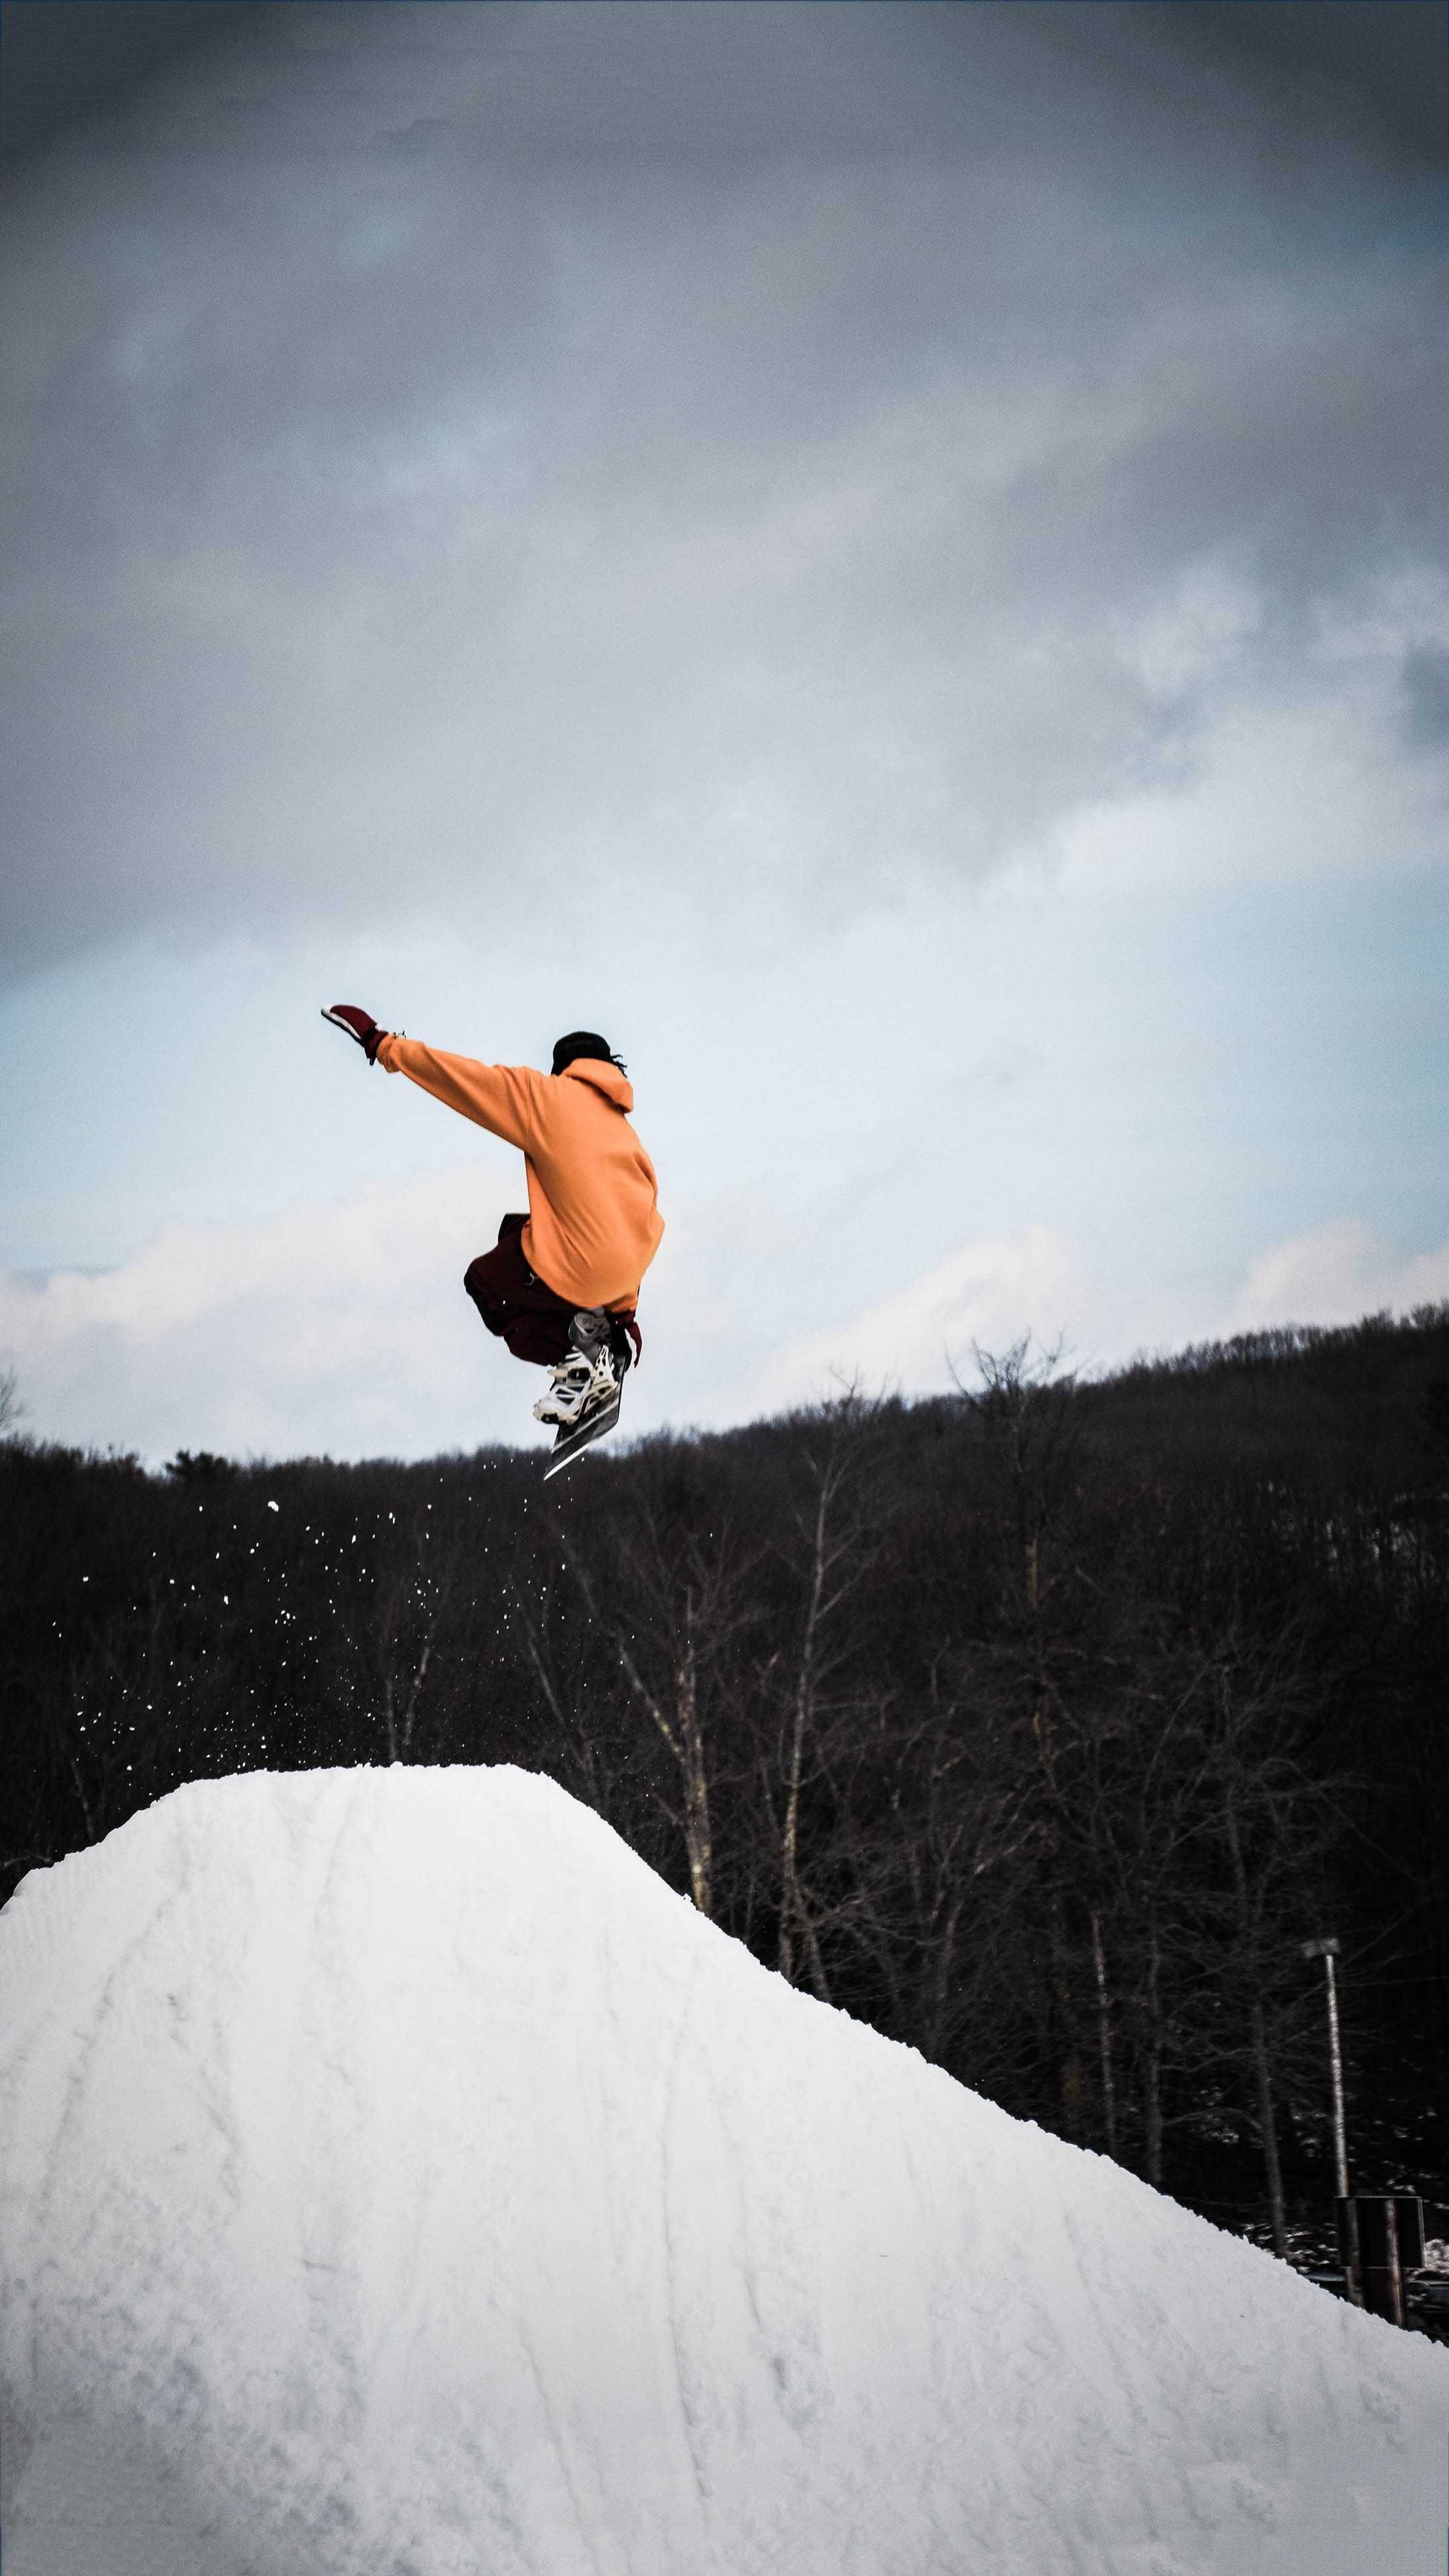 Snowboarding: Slopestyle at a terrain park, Snowboard tricks in the air, Extreme sport. 2160x3840 4K Background.